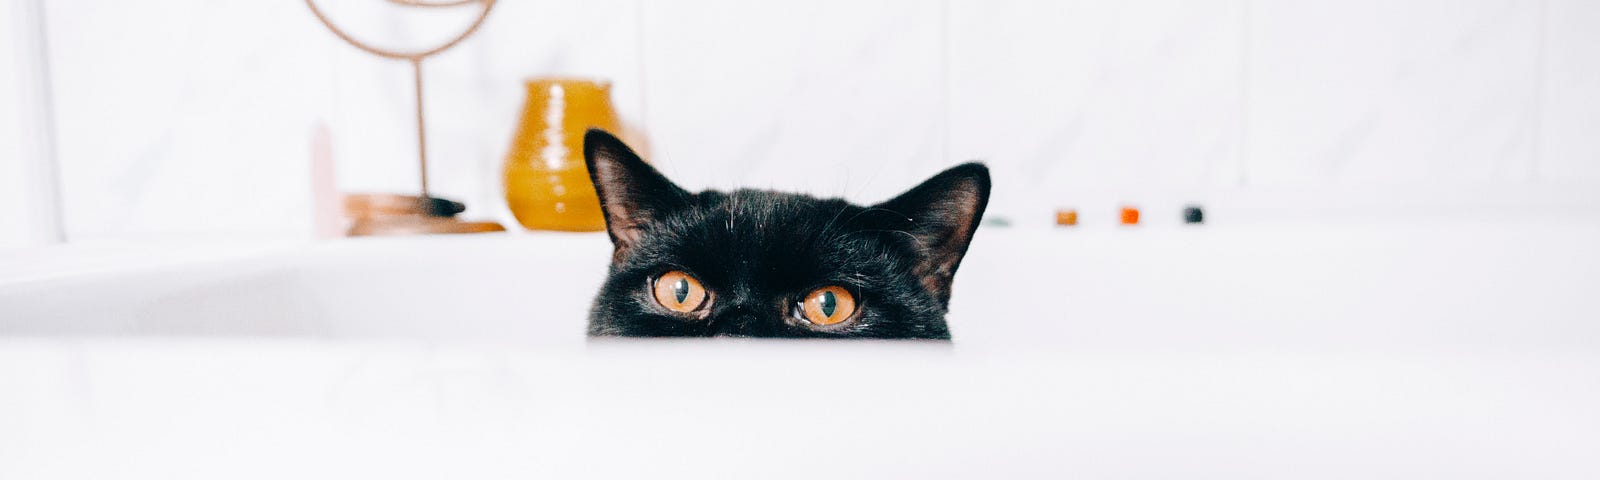 A black cat peeking out of a white bathtub, only showing the top half of his face/head.